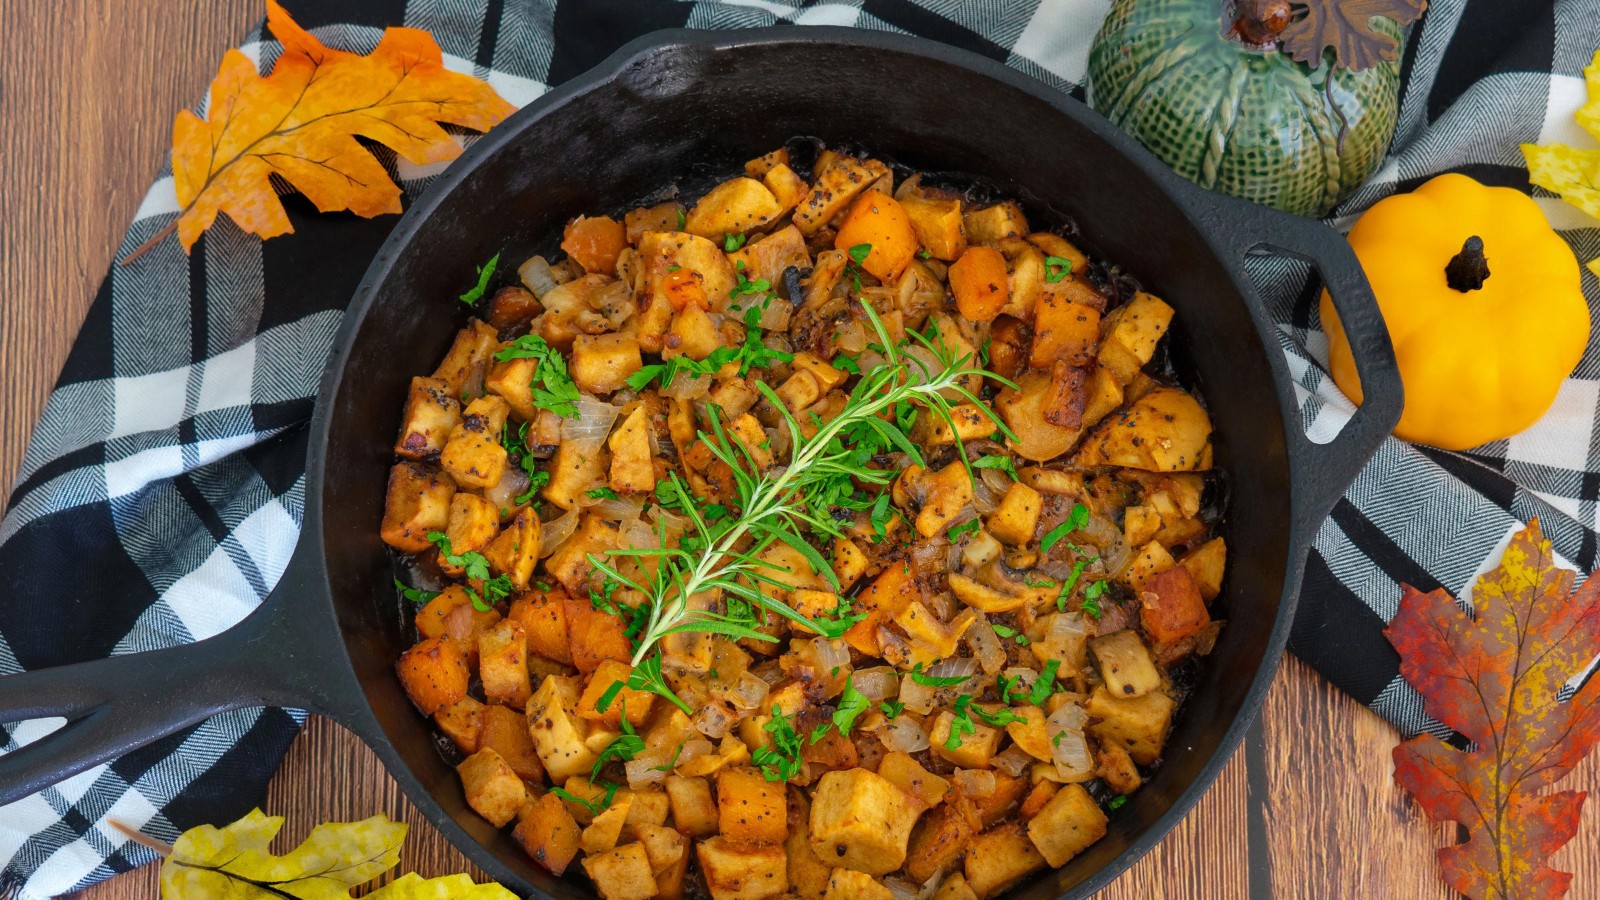 Image of Gluten Free Stuffing With Mushrooms & ButterNut Squash